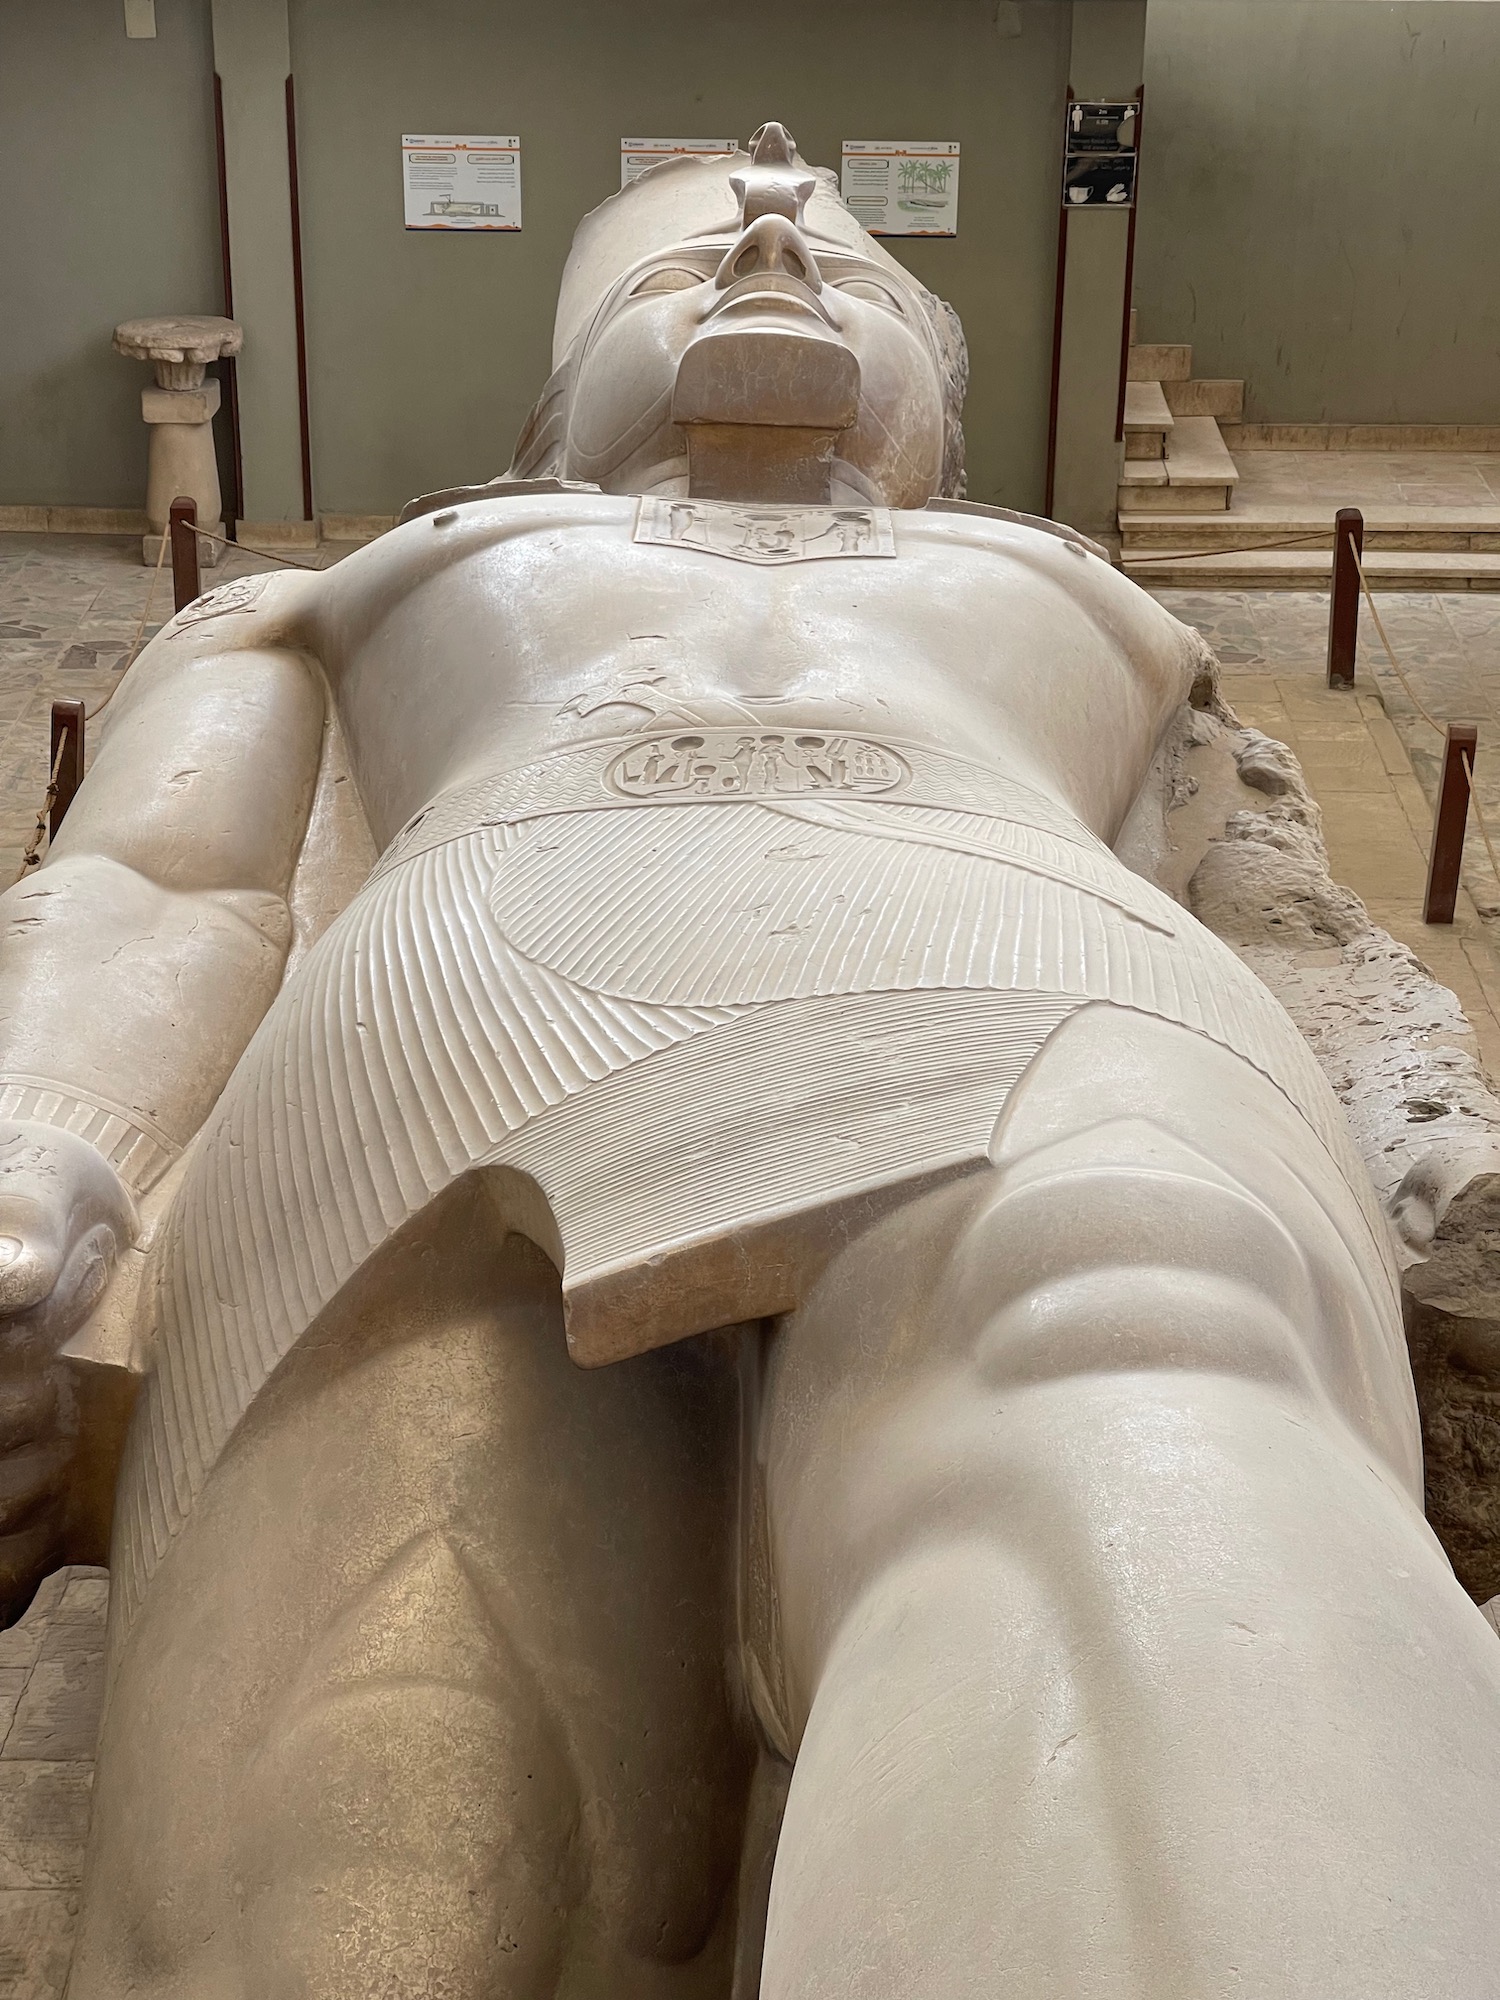 a statue of a man lying down